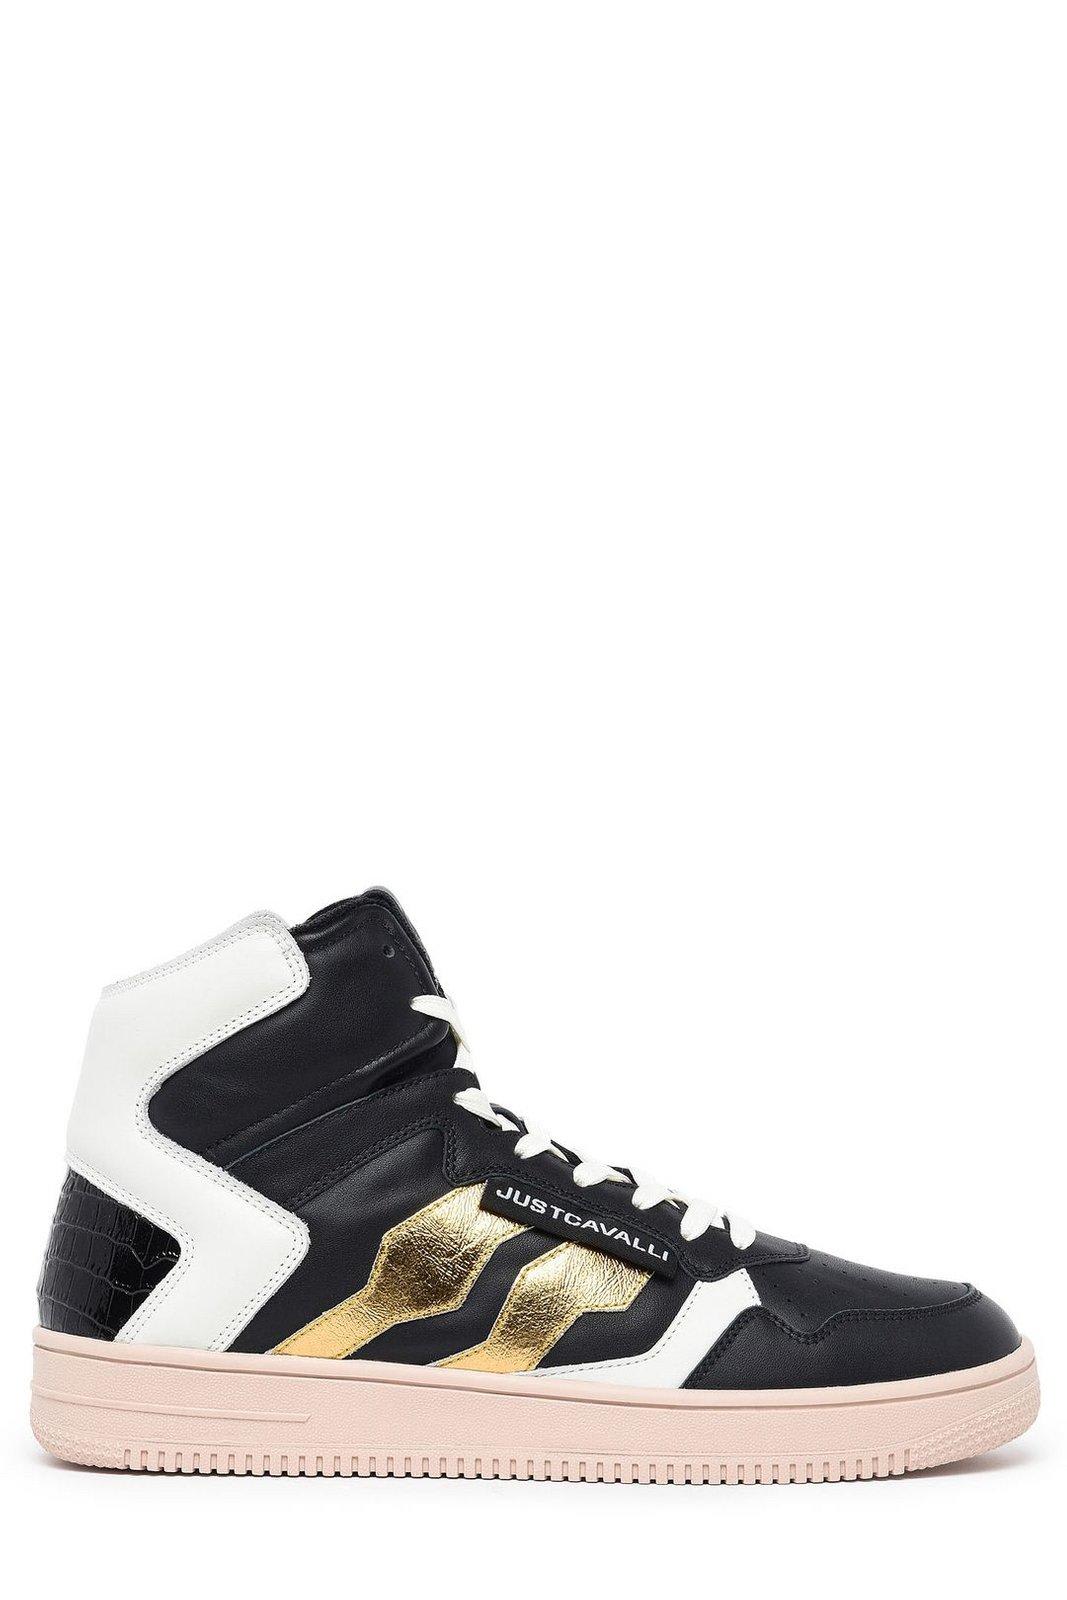 Just Cavalli Logo Patch Lace-up Sneakers